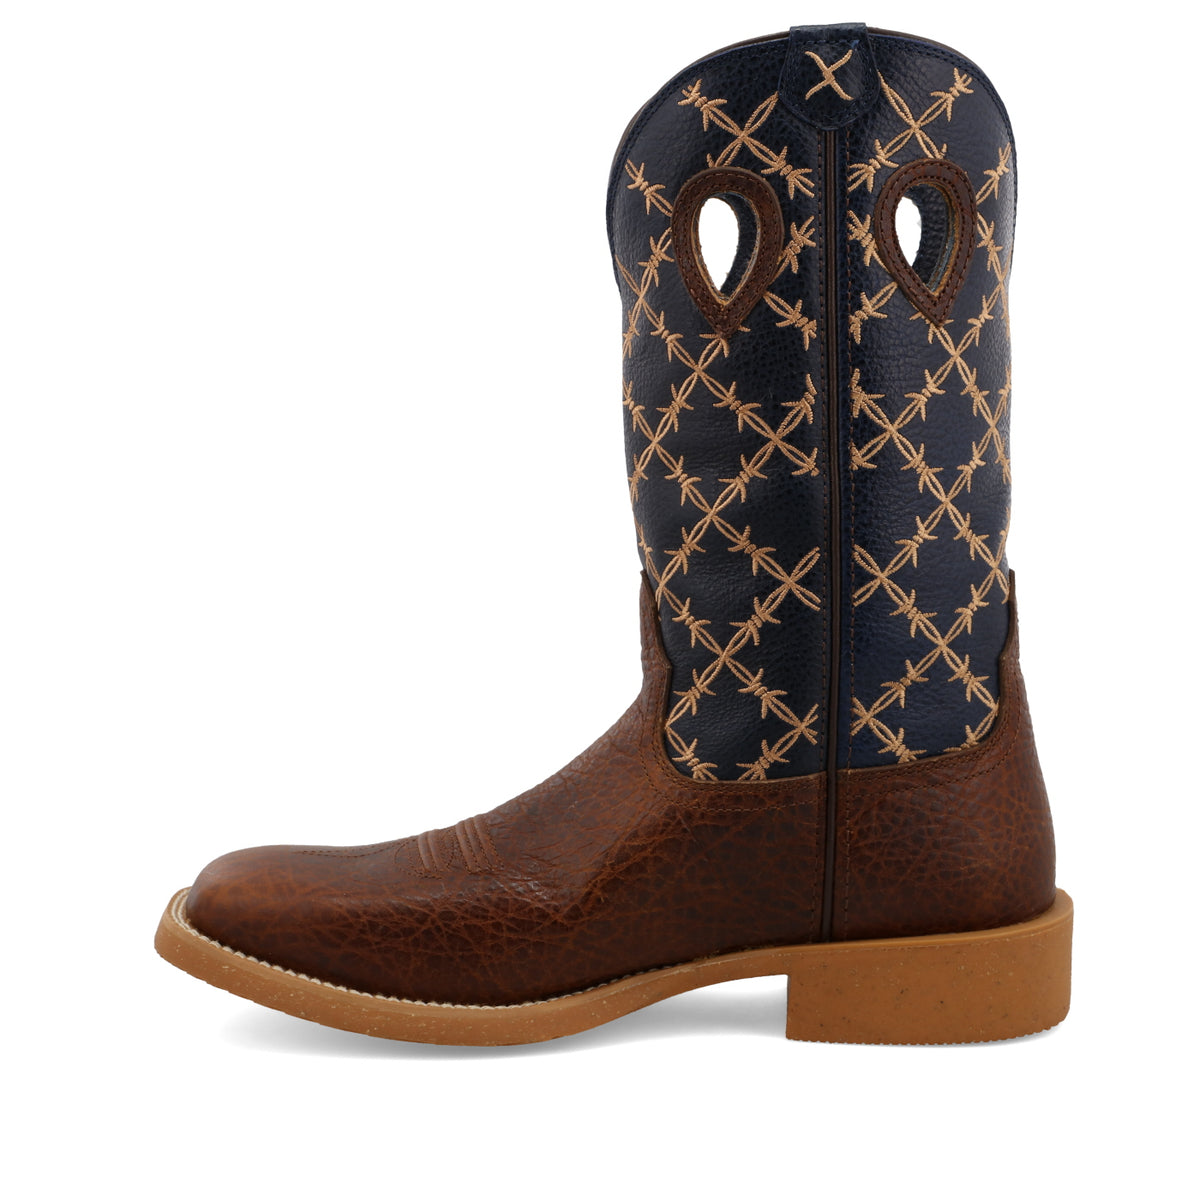 Twisted X Men's Tech X Rustic Brown and Navy Western Boot